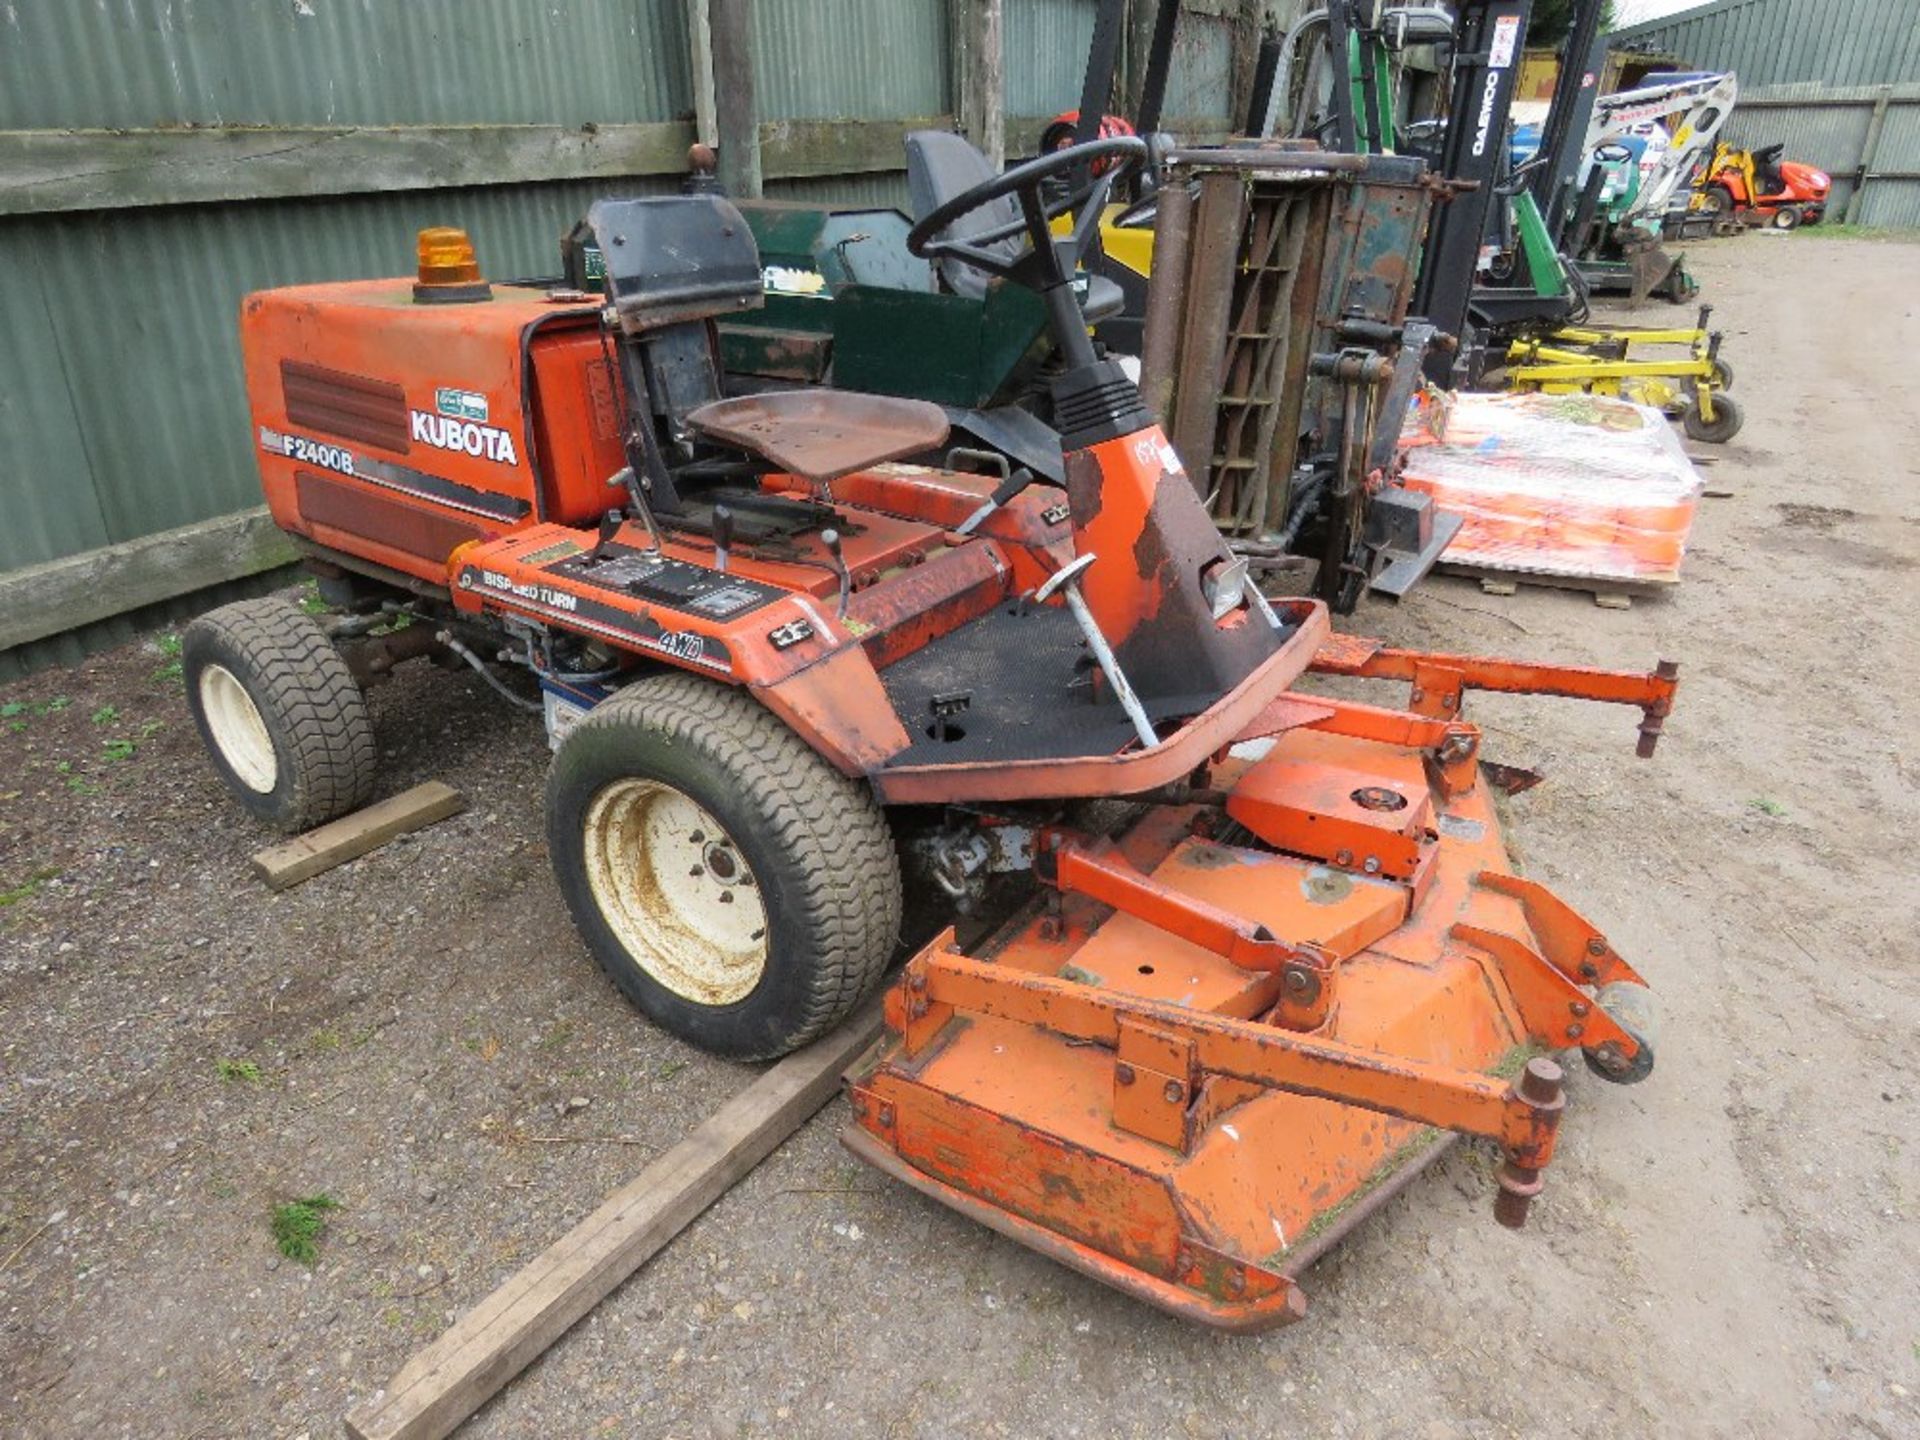 KUBOTA F2400B RIDE ON ROTARY MOWER, 4WD. WHEN TESTED WAS SEEN TO RUN, DRIVE AND MOWER ENGAGED...SEE